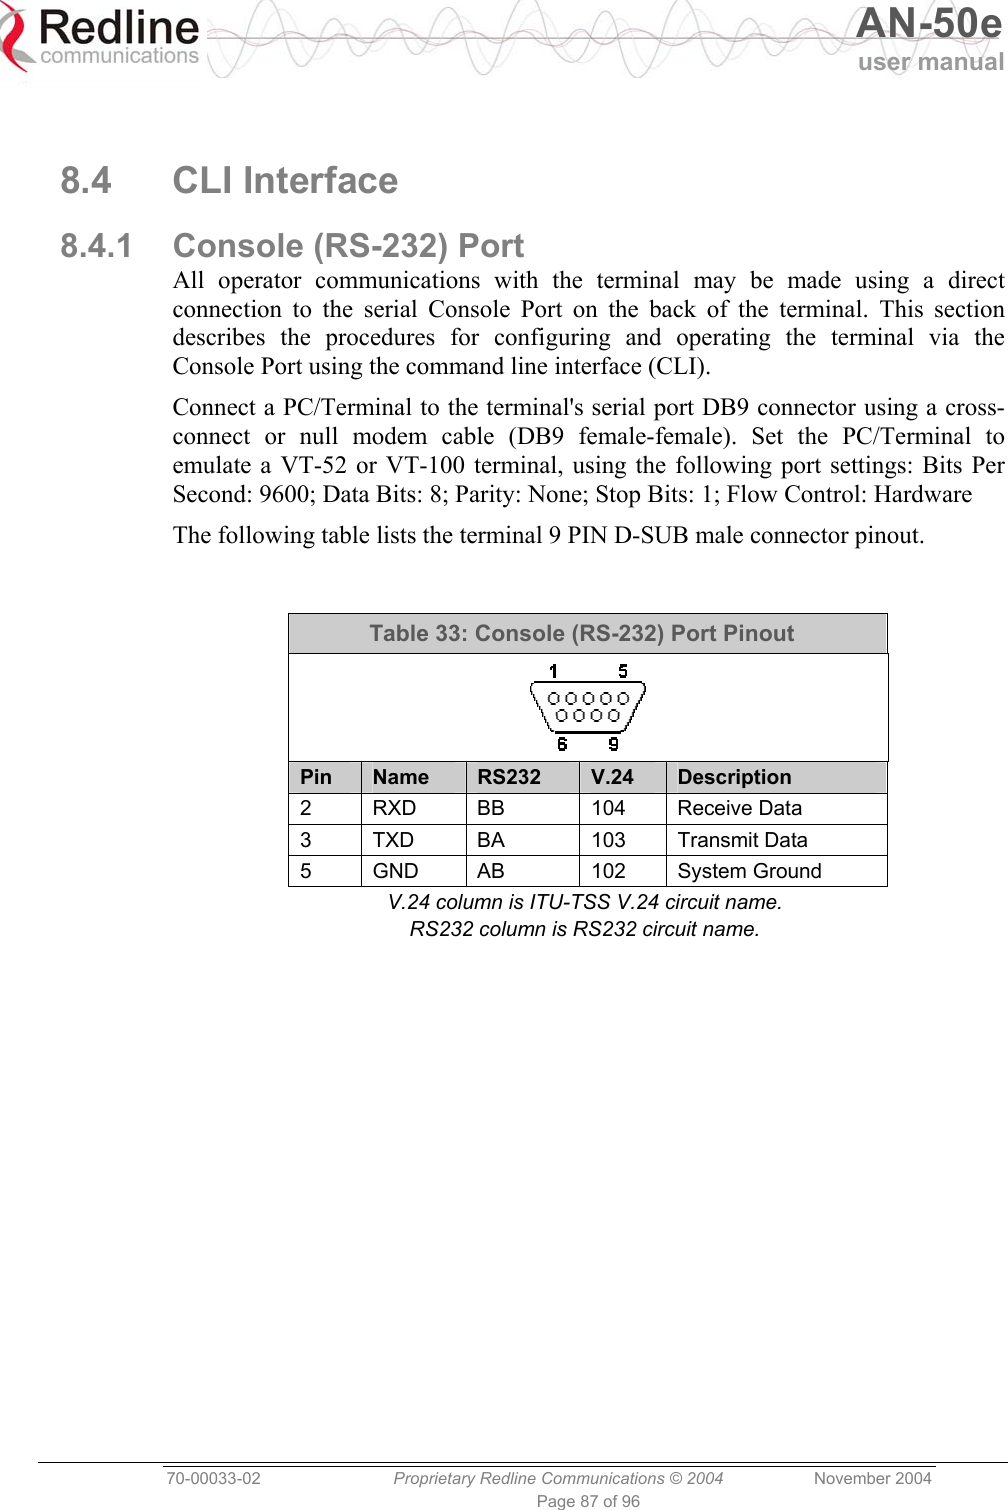   AN-50e user manual  70-00033-02  Proprietary Redline Communications © 2004 November 2004 Page 87 of 96   8.4 CLI Interface 8.4.1  Console (RS-232) Port All operator communications with the terminal may be made using a direct connection to the serial Console Port on the back of the terminal. This section describes the procedures for configuring and operating the terminal via the Console Port using the command line interface (CLI). Connect a PC/Terminal to the terminal&apos;s serial port DB9 connector using a cross-connect or null modem cable (DB9 female-female). Set the PC/Terminal to emulate a VT-52 or VT-100 terminal, using the following port settings: Bits Per Second: 9600; Data Bits: 8; Parity: None; Stop Bits: 1; Flow Control: Hardware The following table lists the terminal 9 PIN D-SUB male connector pinout.  Table 33: Console (RS-232) Port Pinout  Pin  Name  RS232  V.24  Description 2 RXD BB  104 Receive Data 3 TXD BA  103 Transmit Data 5 GND AB  102 System Ground V.24 column is ITU-TSS V.24 circuit name. RS232 column is RS232 circuit name.  